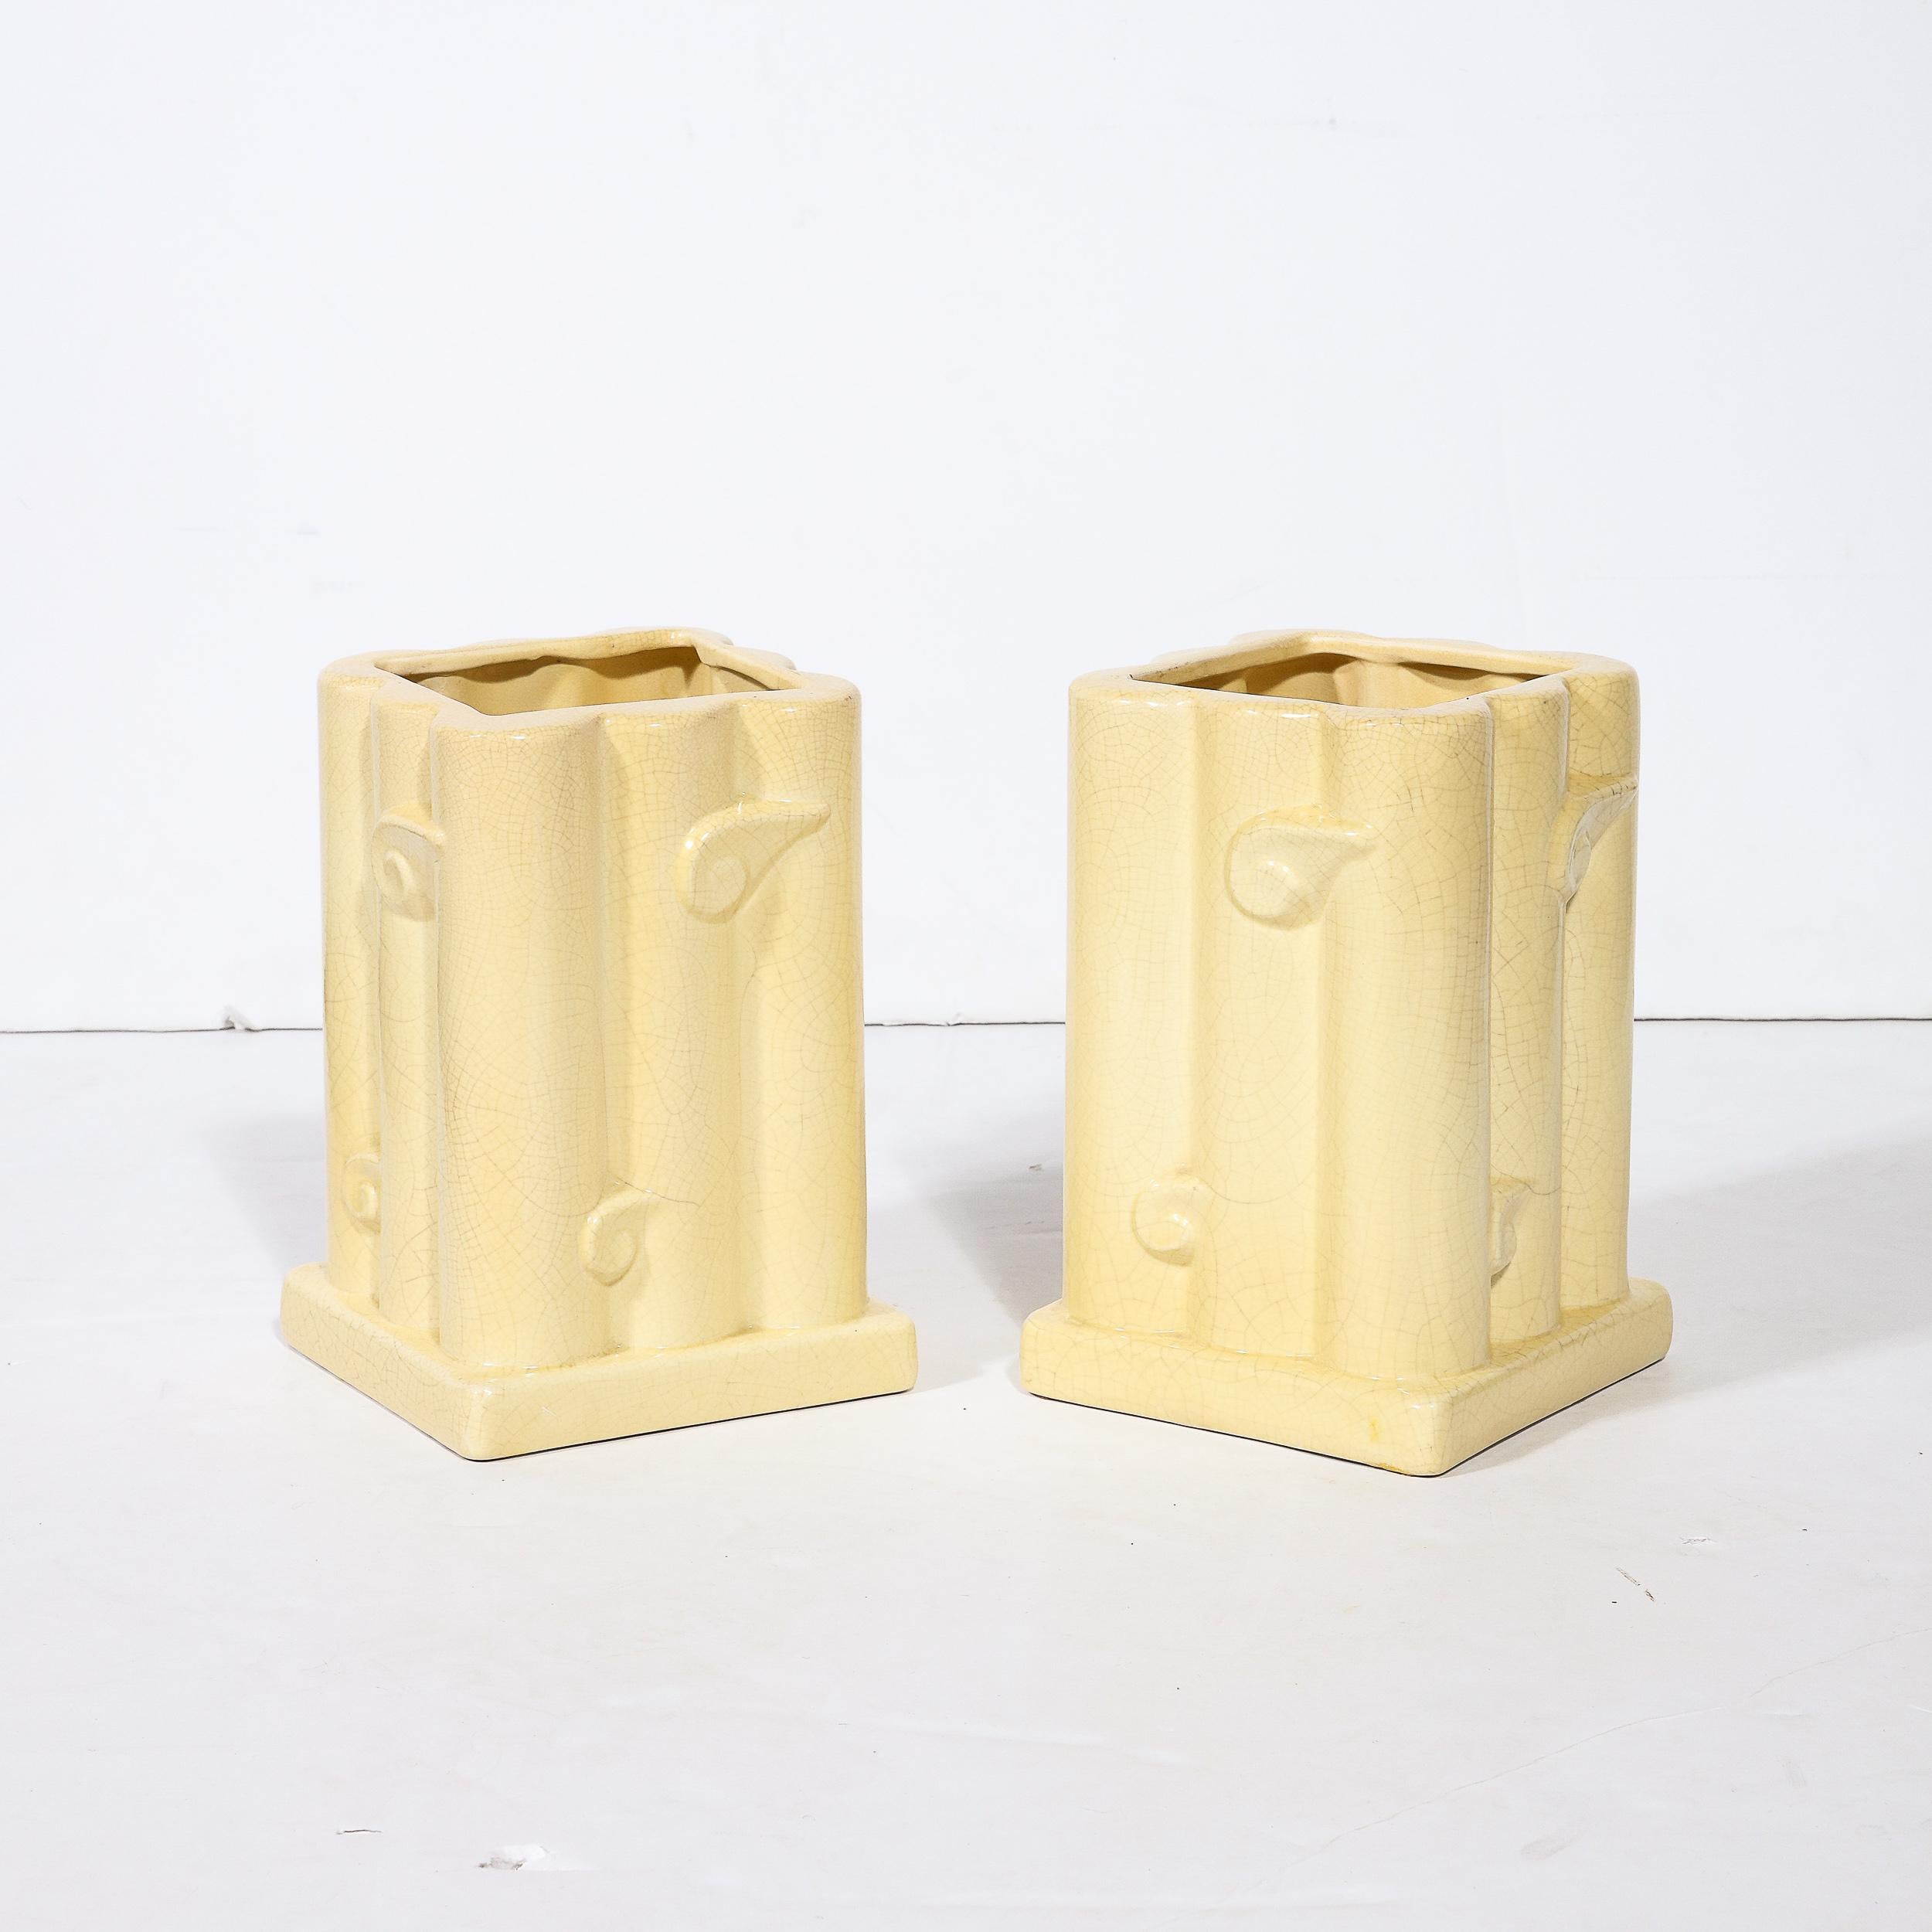 Pair of Art Deco Cream Ceramic Vases W/ Stylized Cloud Motif & Craqueleur Finish In Good Condition For Sale In New York, NY